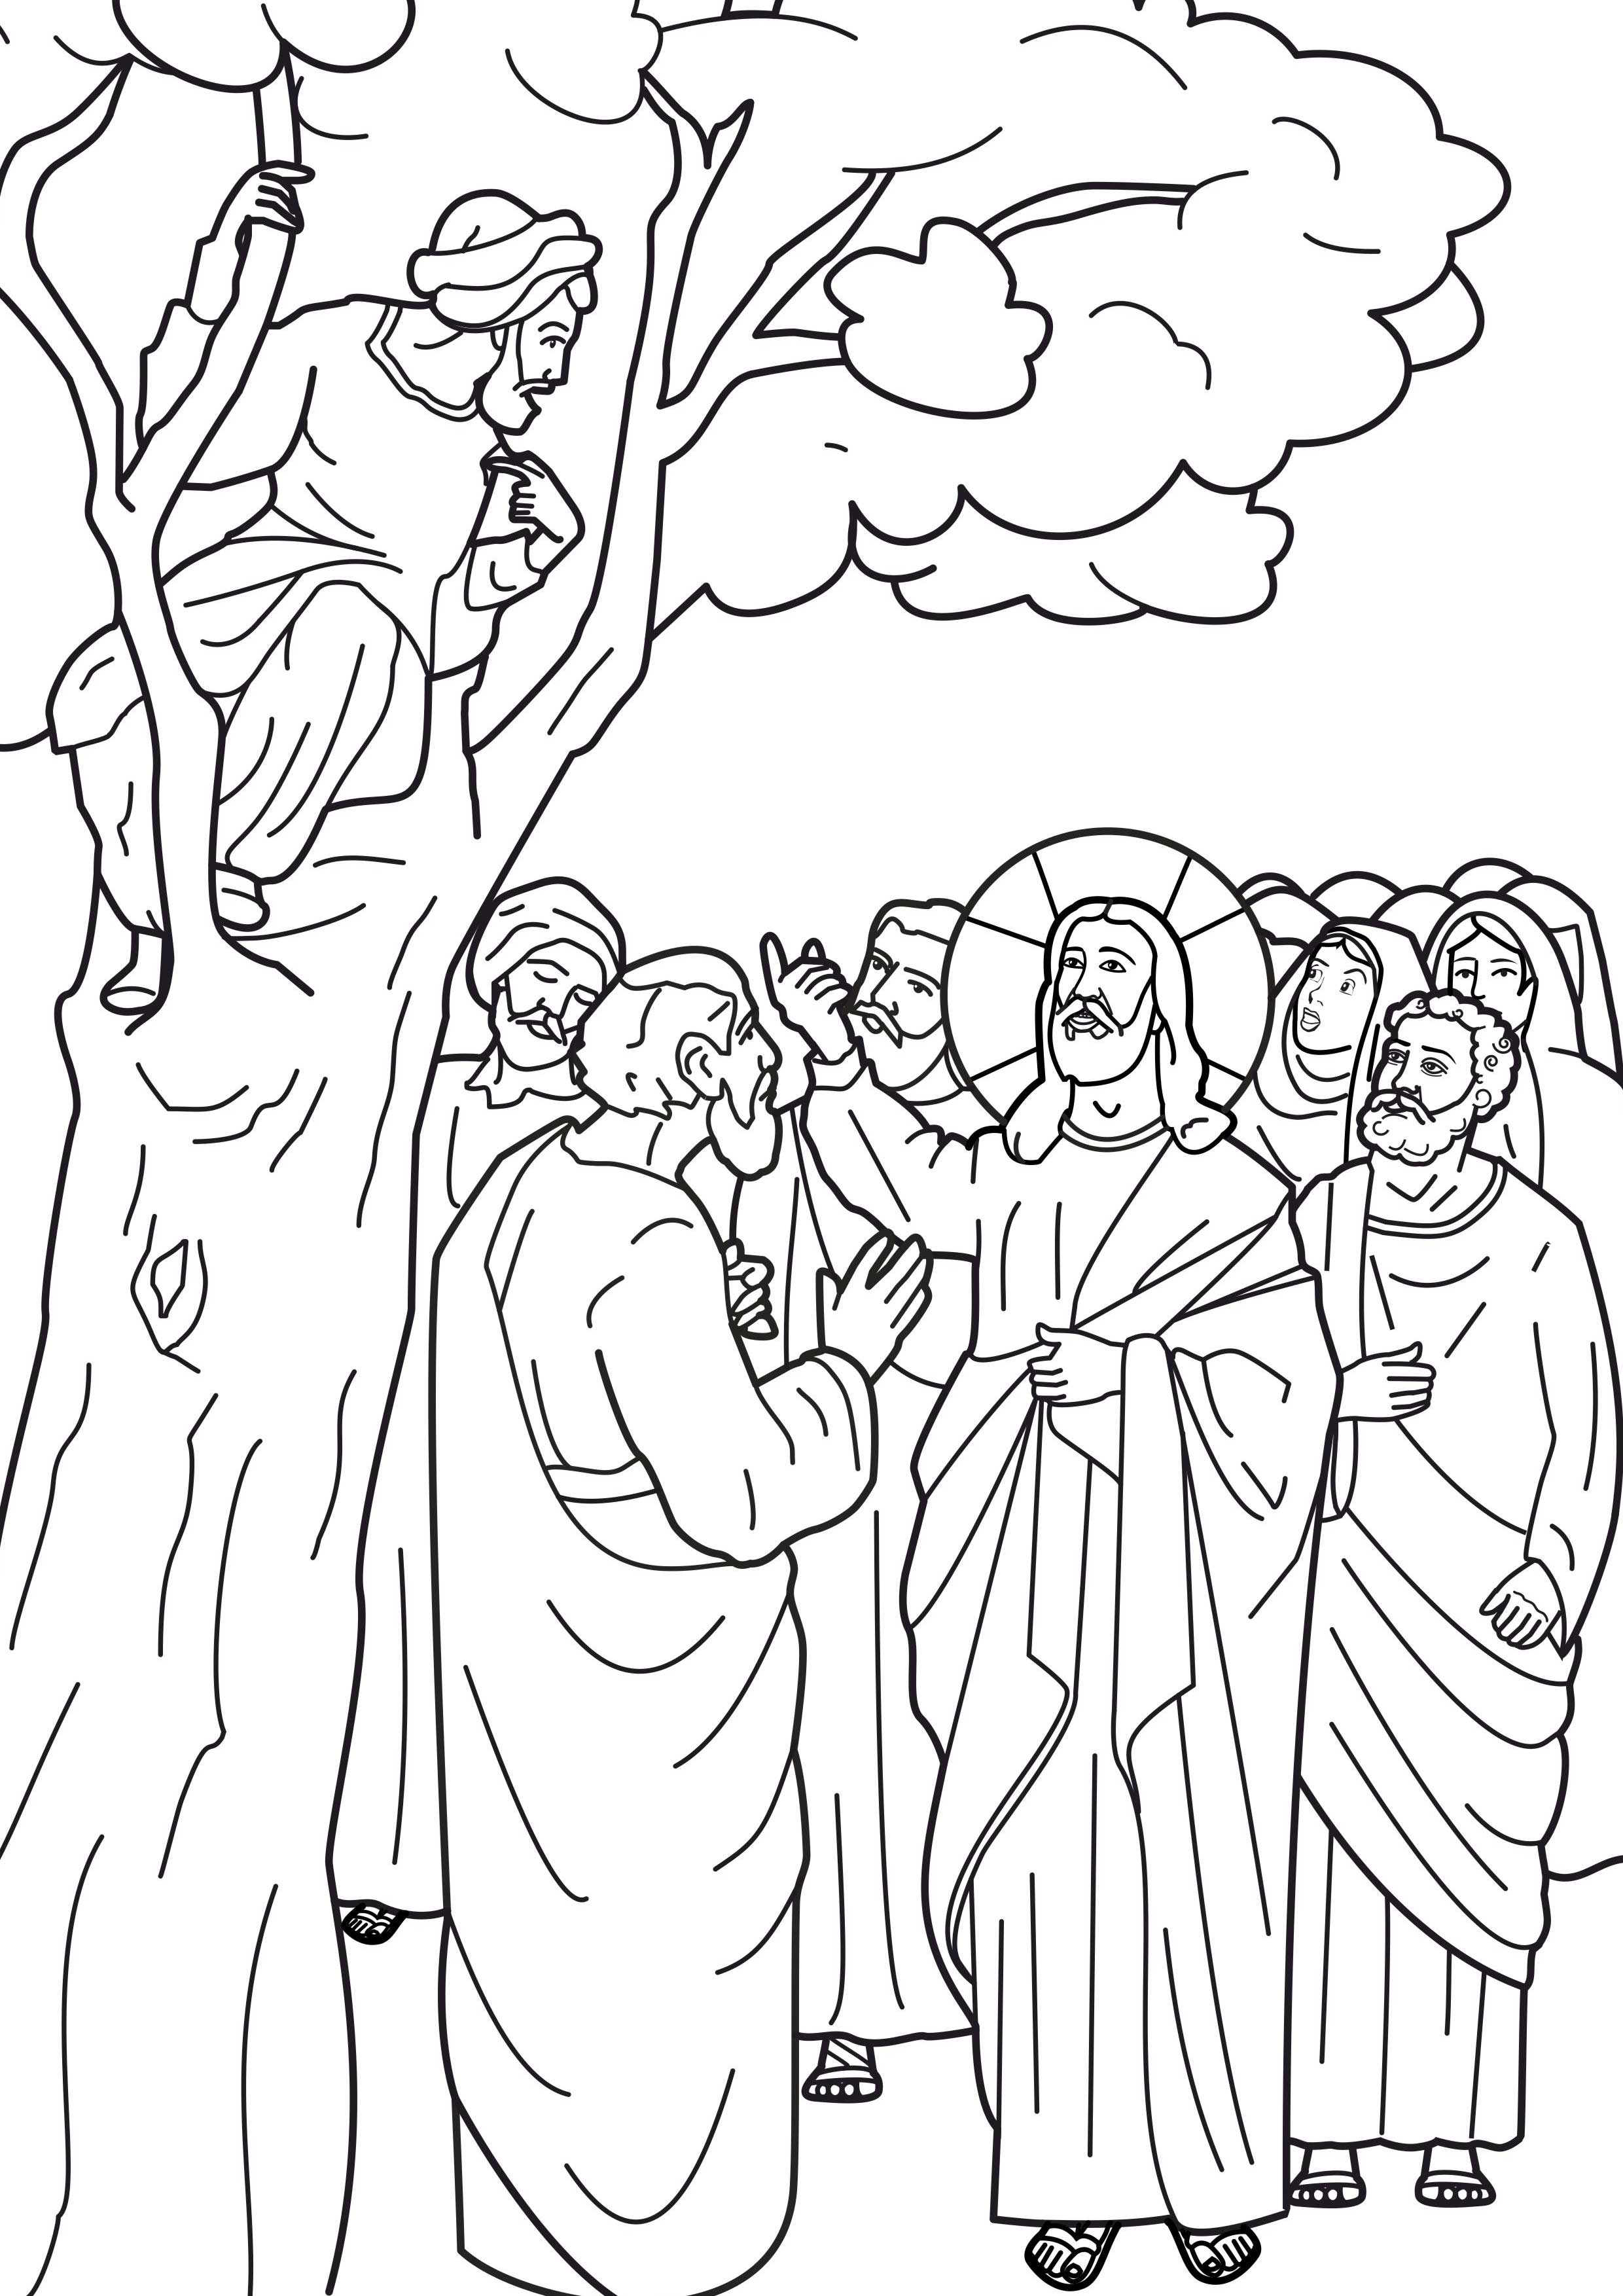 zacchaeus tax collector coloring pages - photo #16